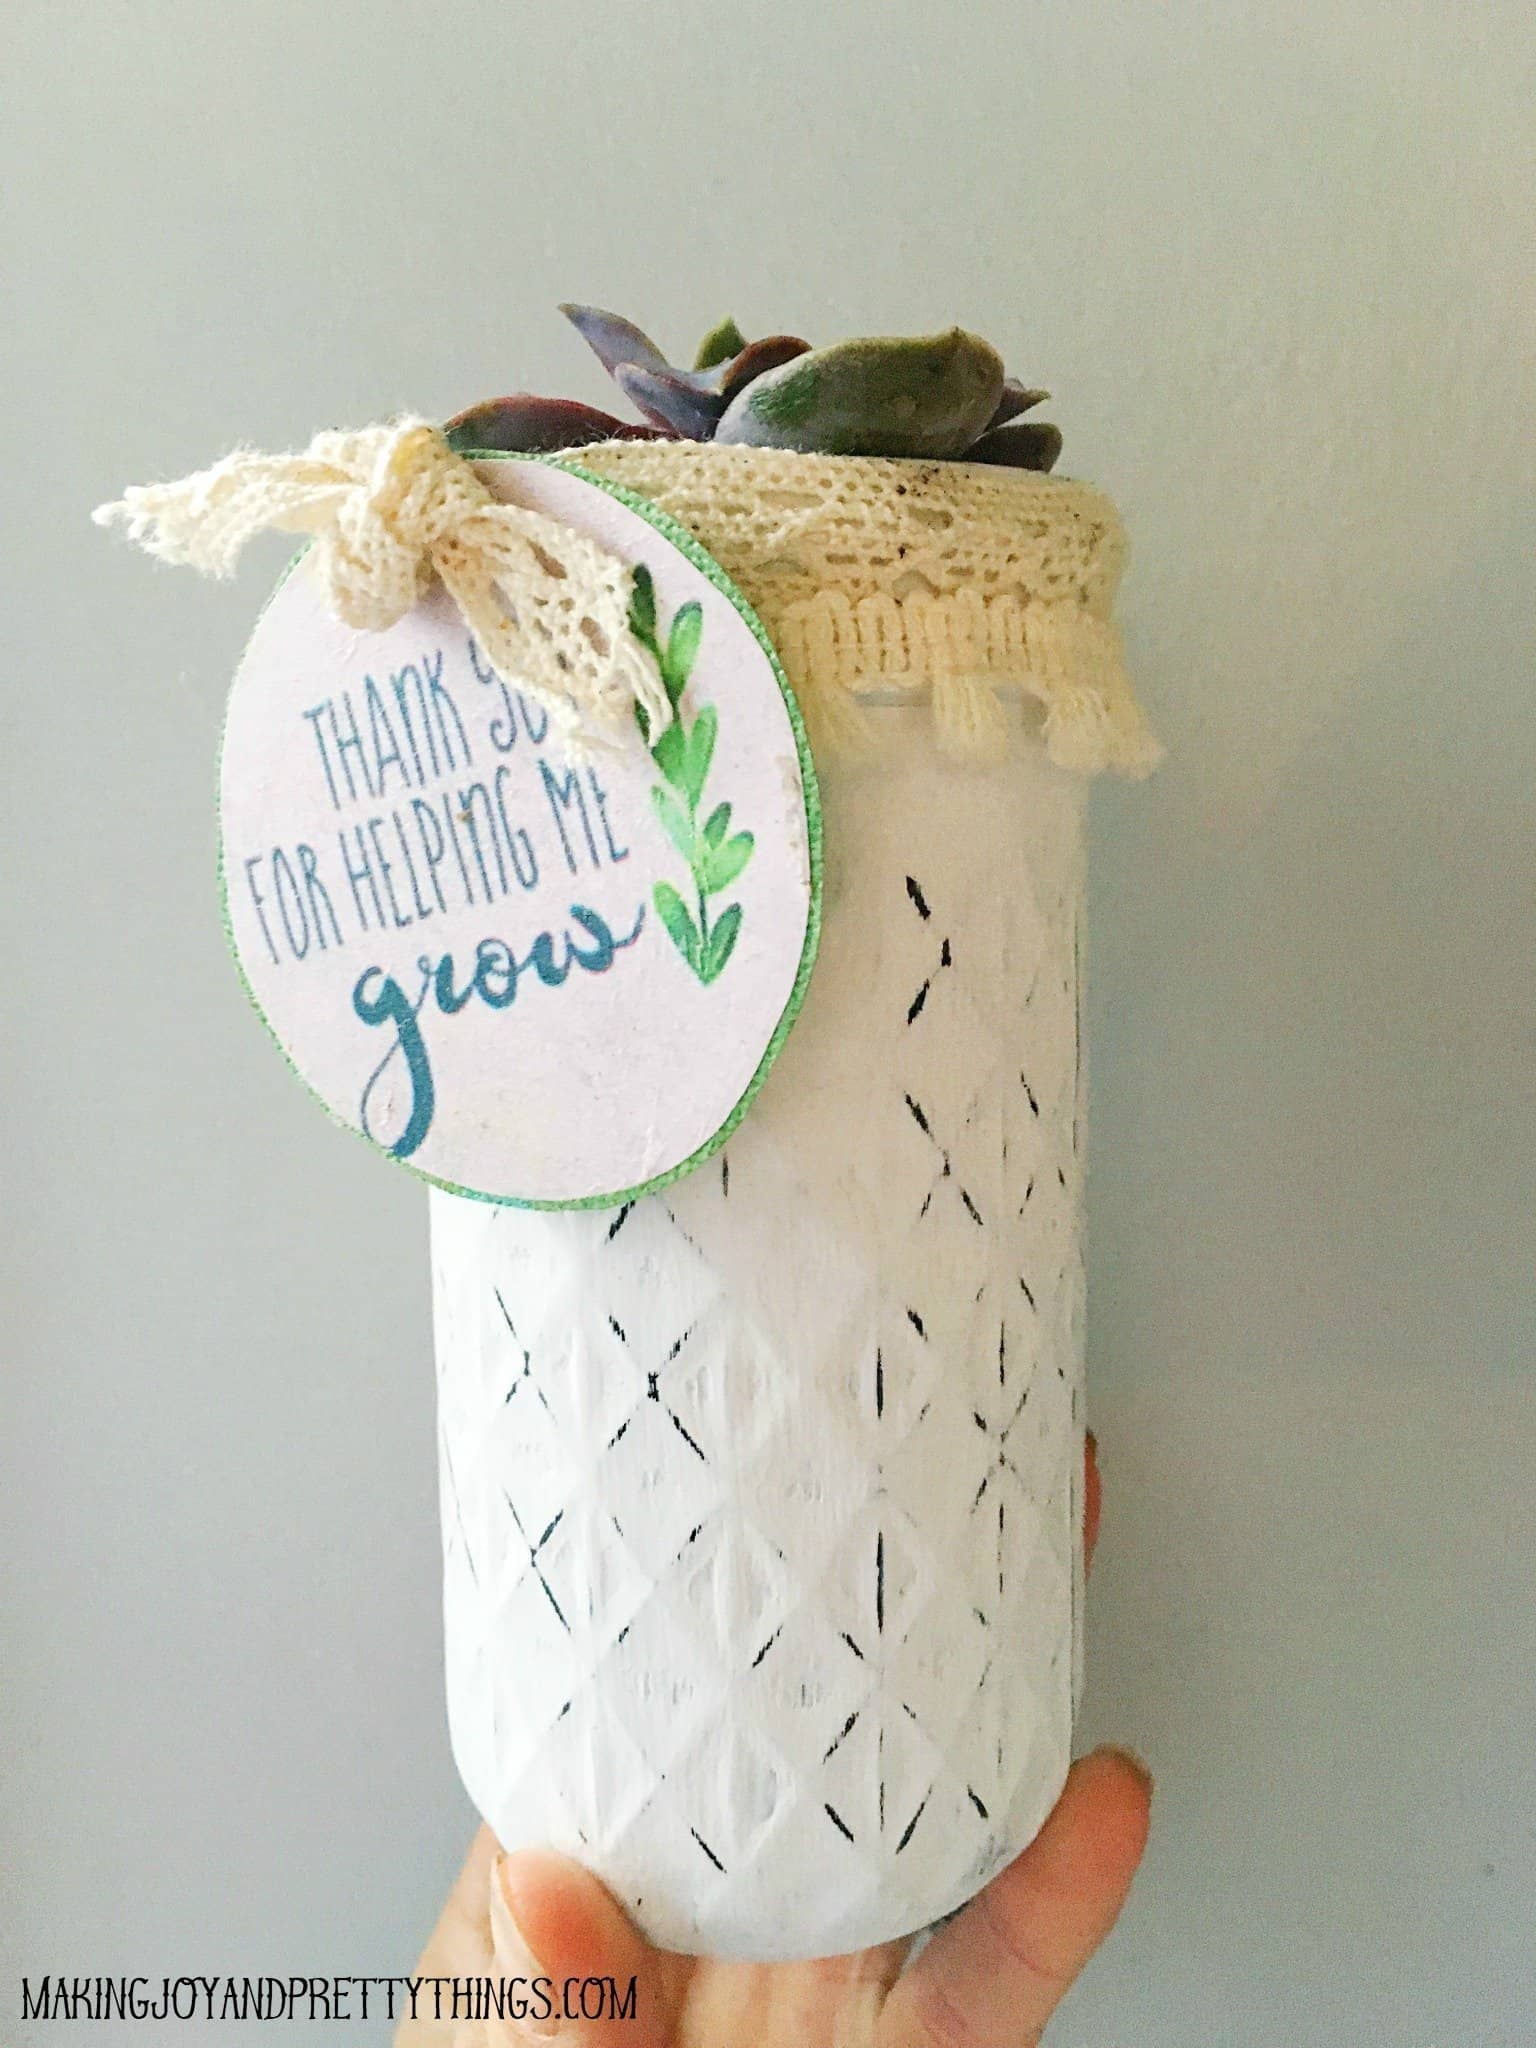 DIY thank you for helping me grow tag on cardstock with michaels ribbon and plants 